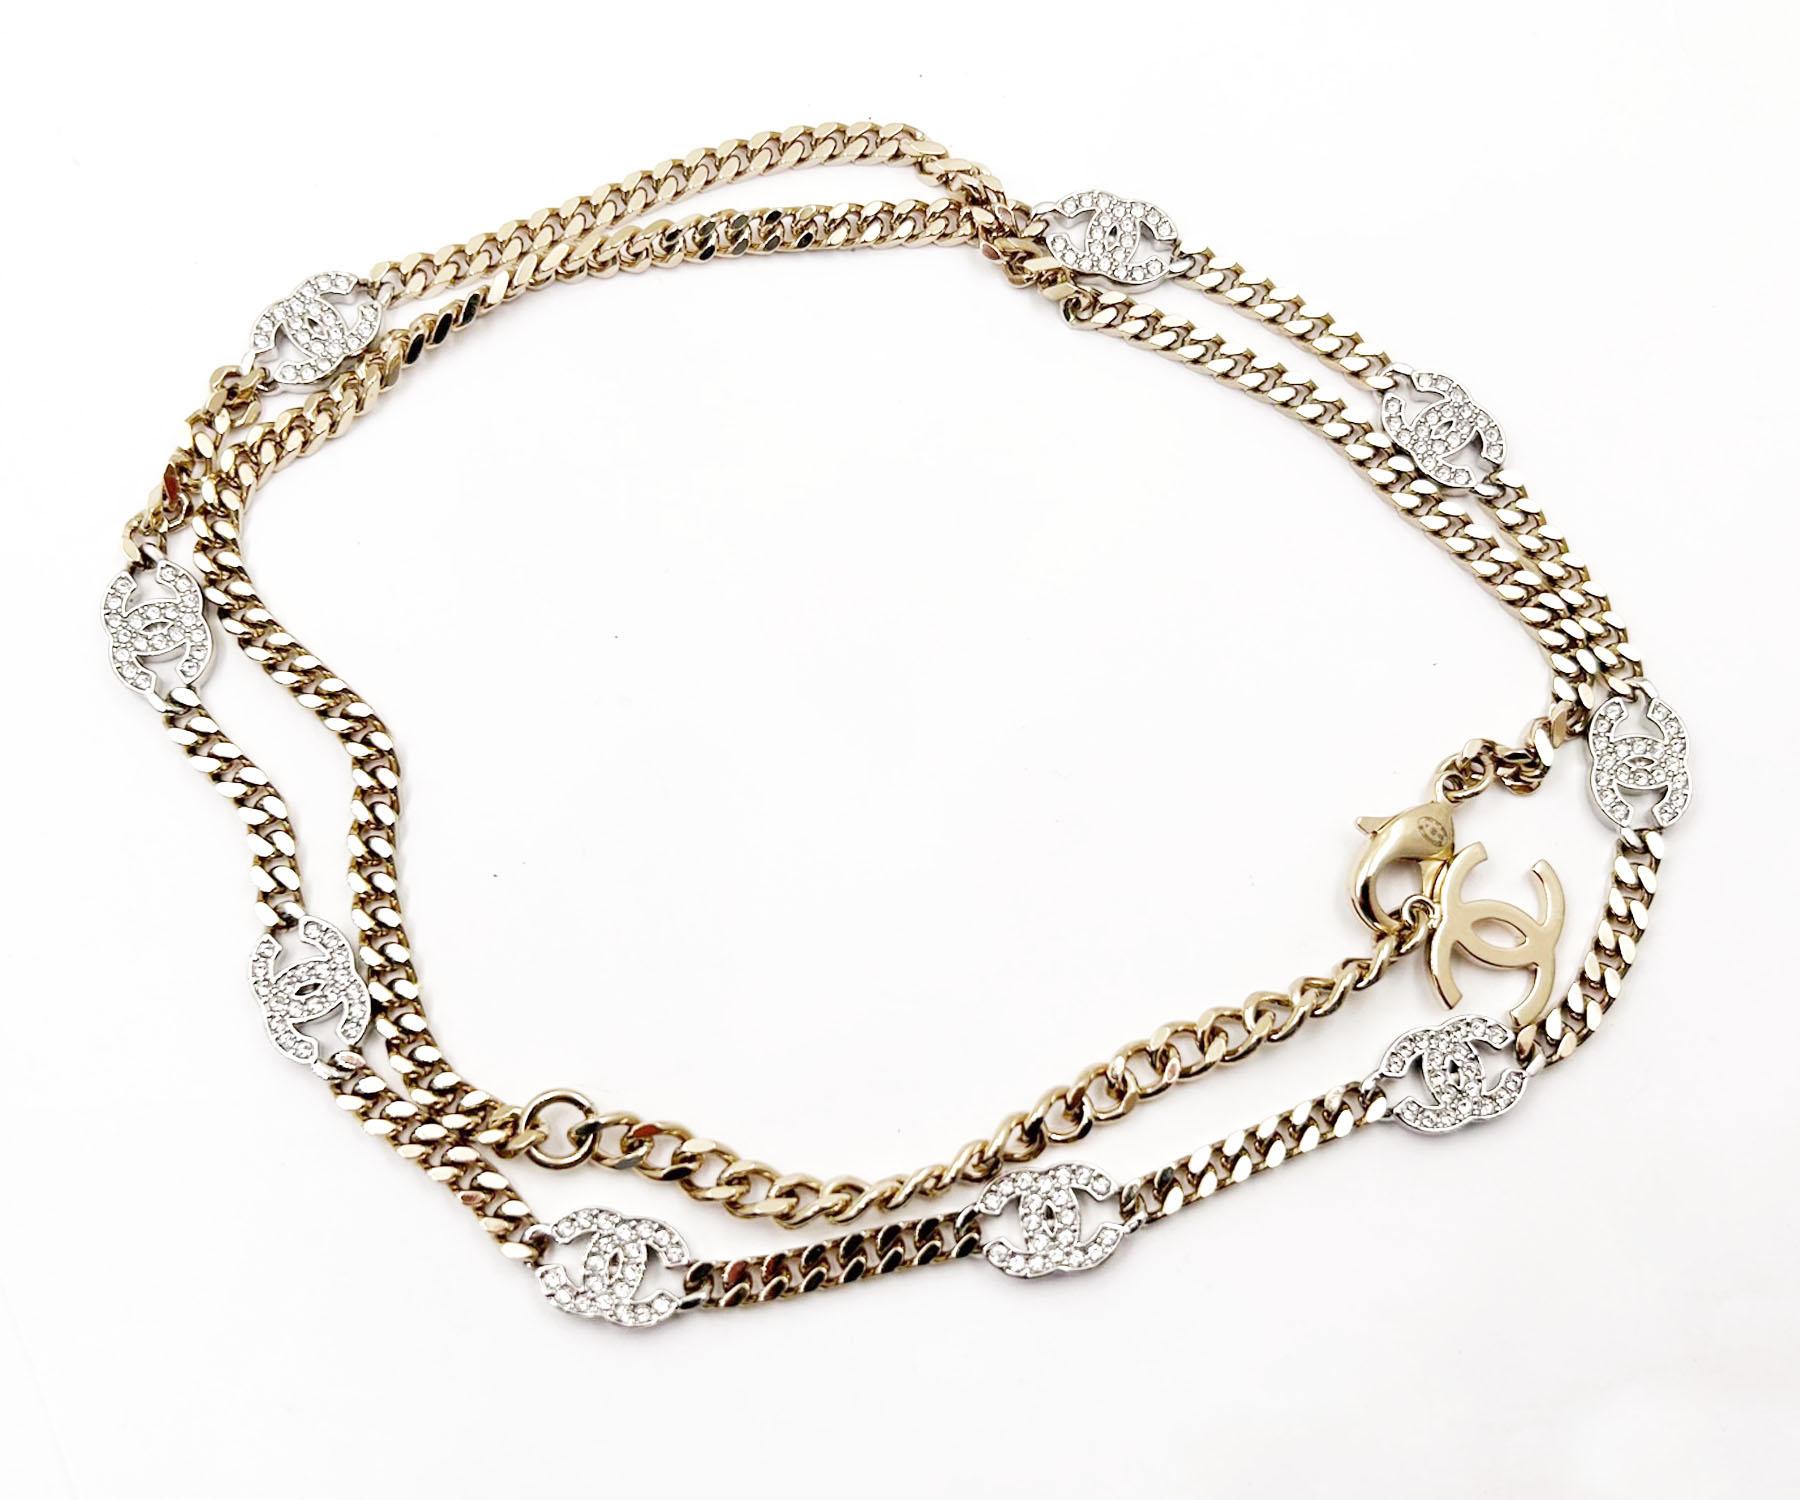 Chanel 9 Silver CC Crystal Gold Chain Belt Necklace

*Marked 21
*Made in Italy

-The necklace/ belt is approximately 29.5